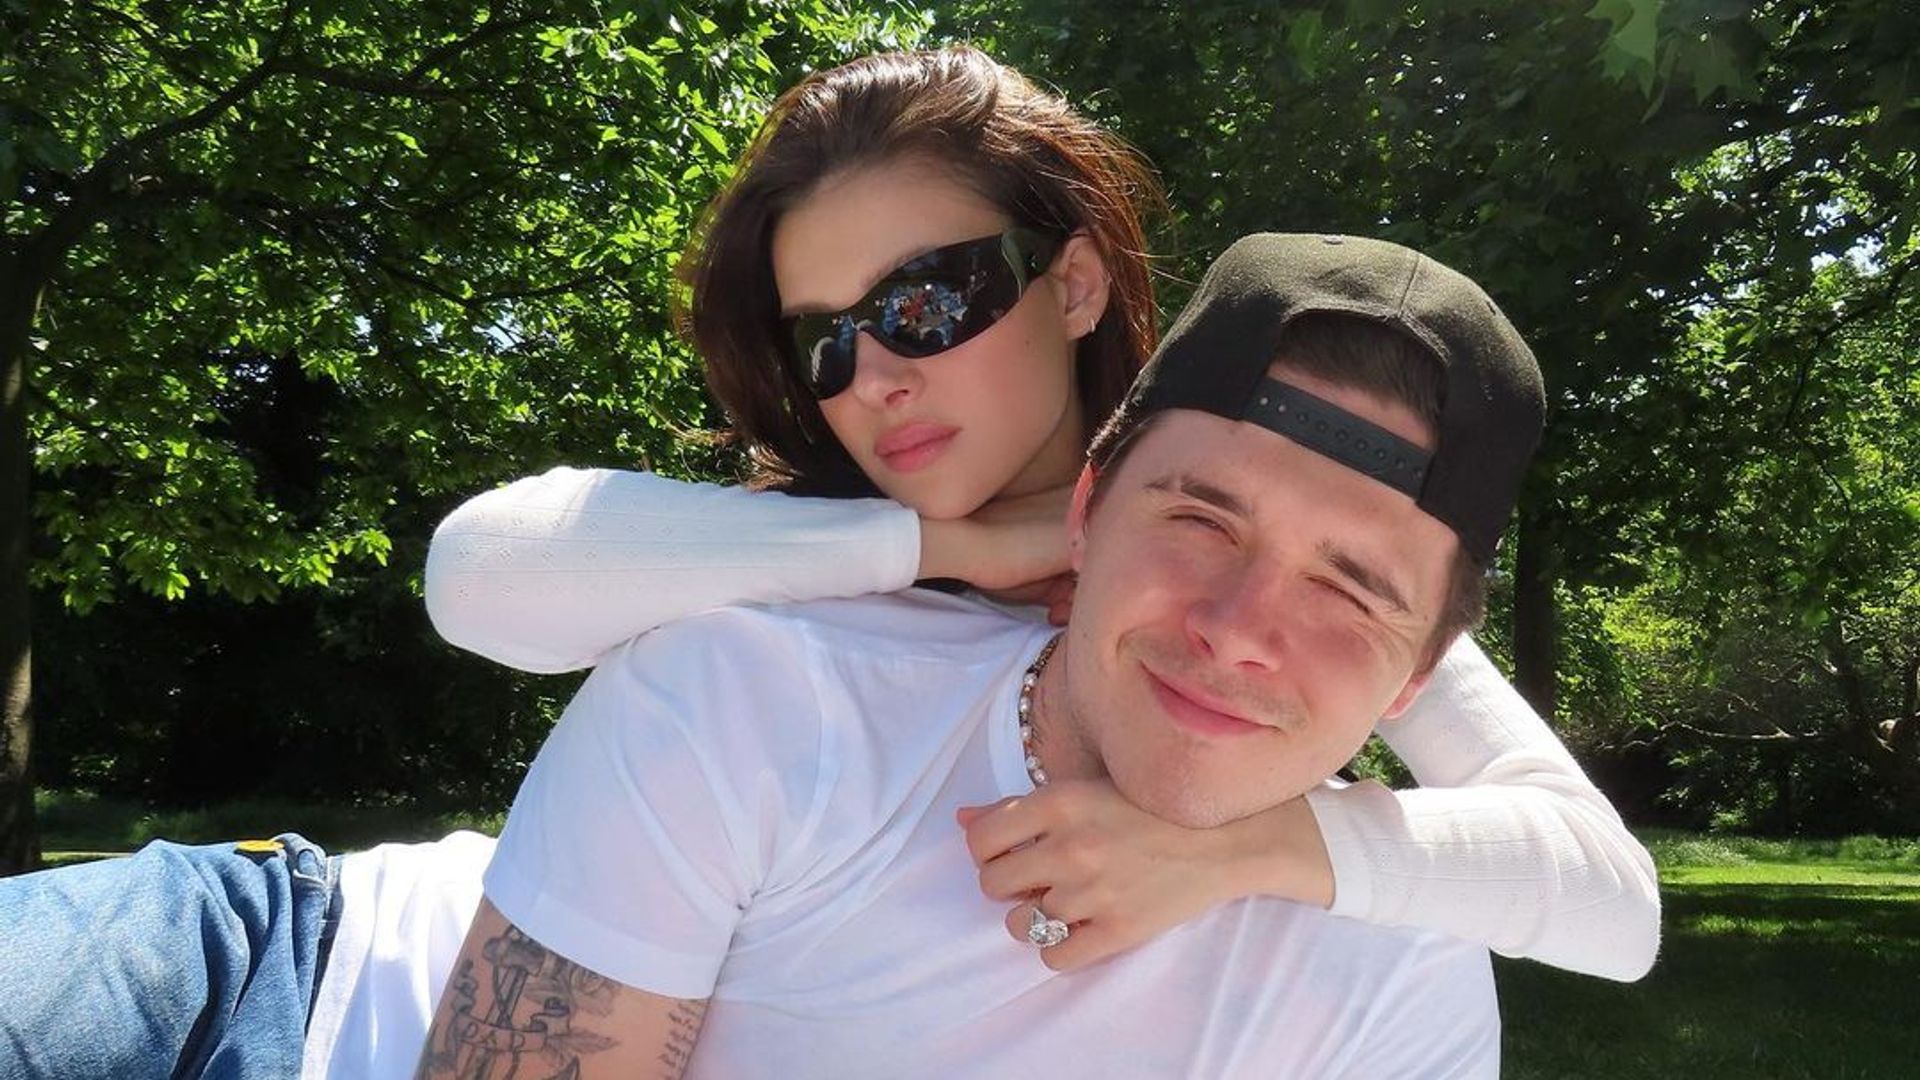 Brooklyn Beckham also got in on the matching outfit action 